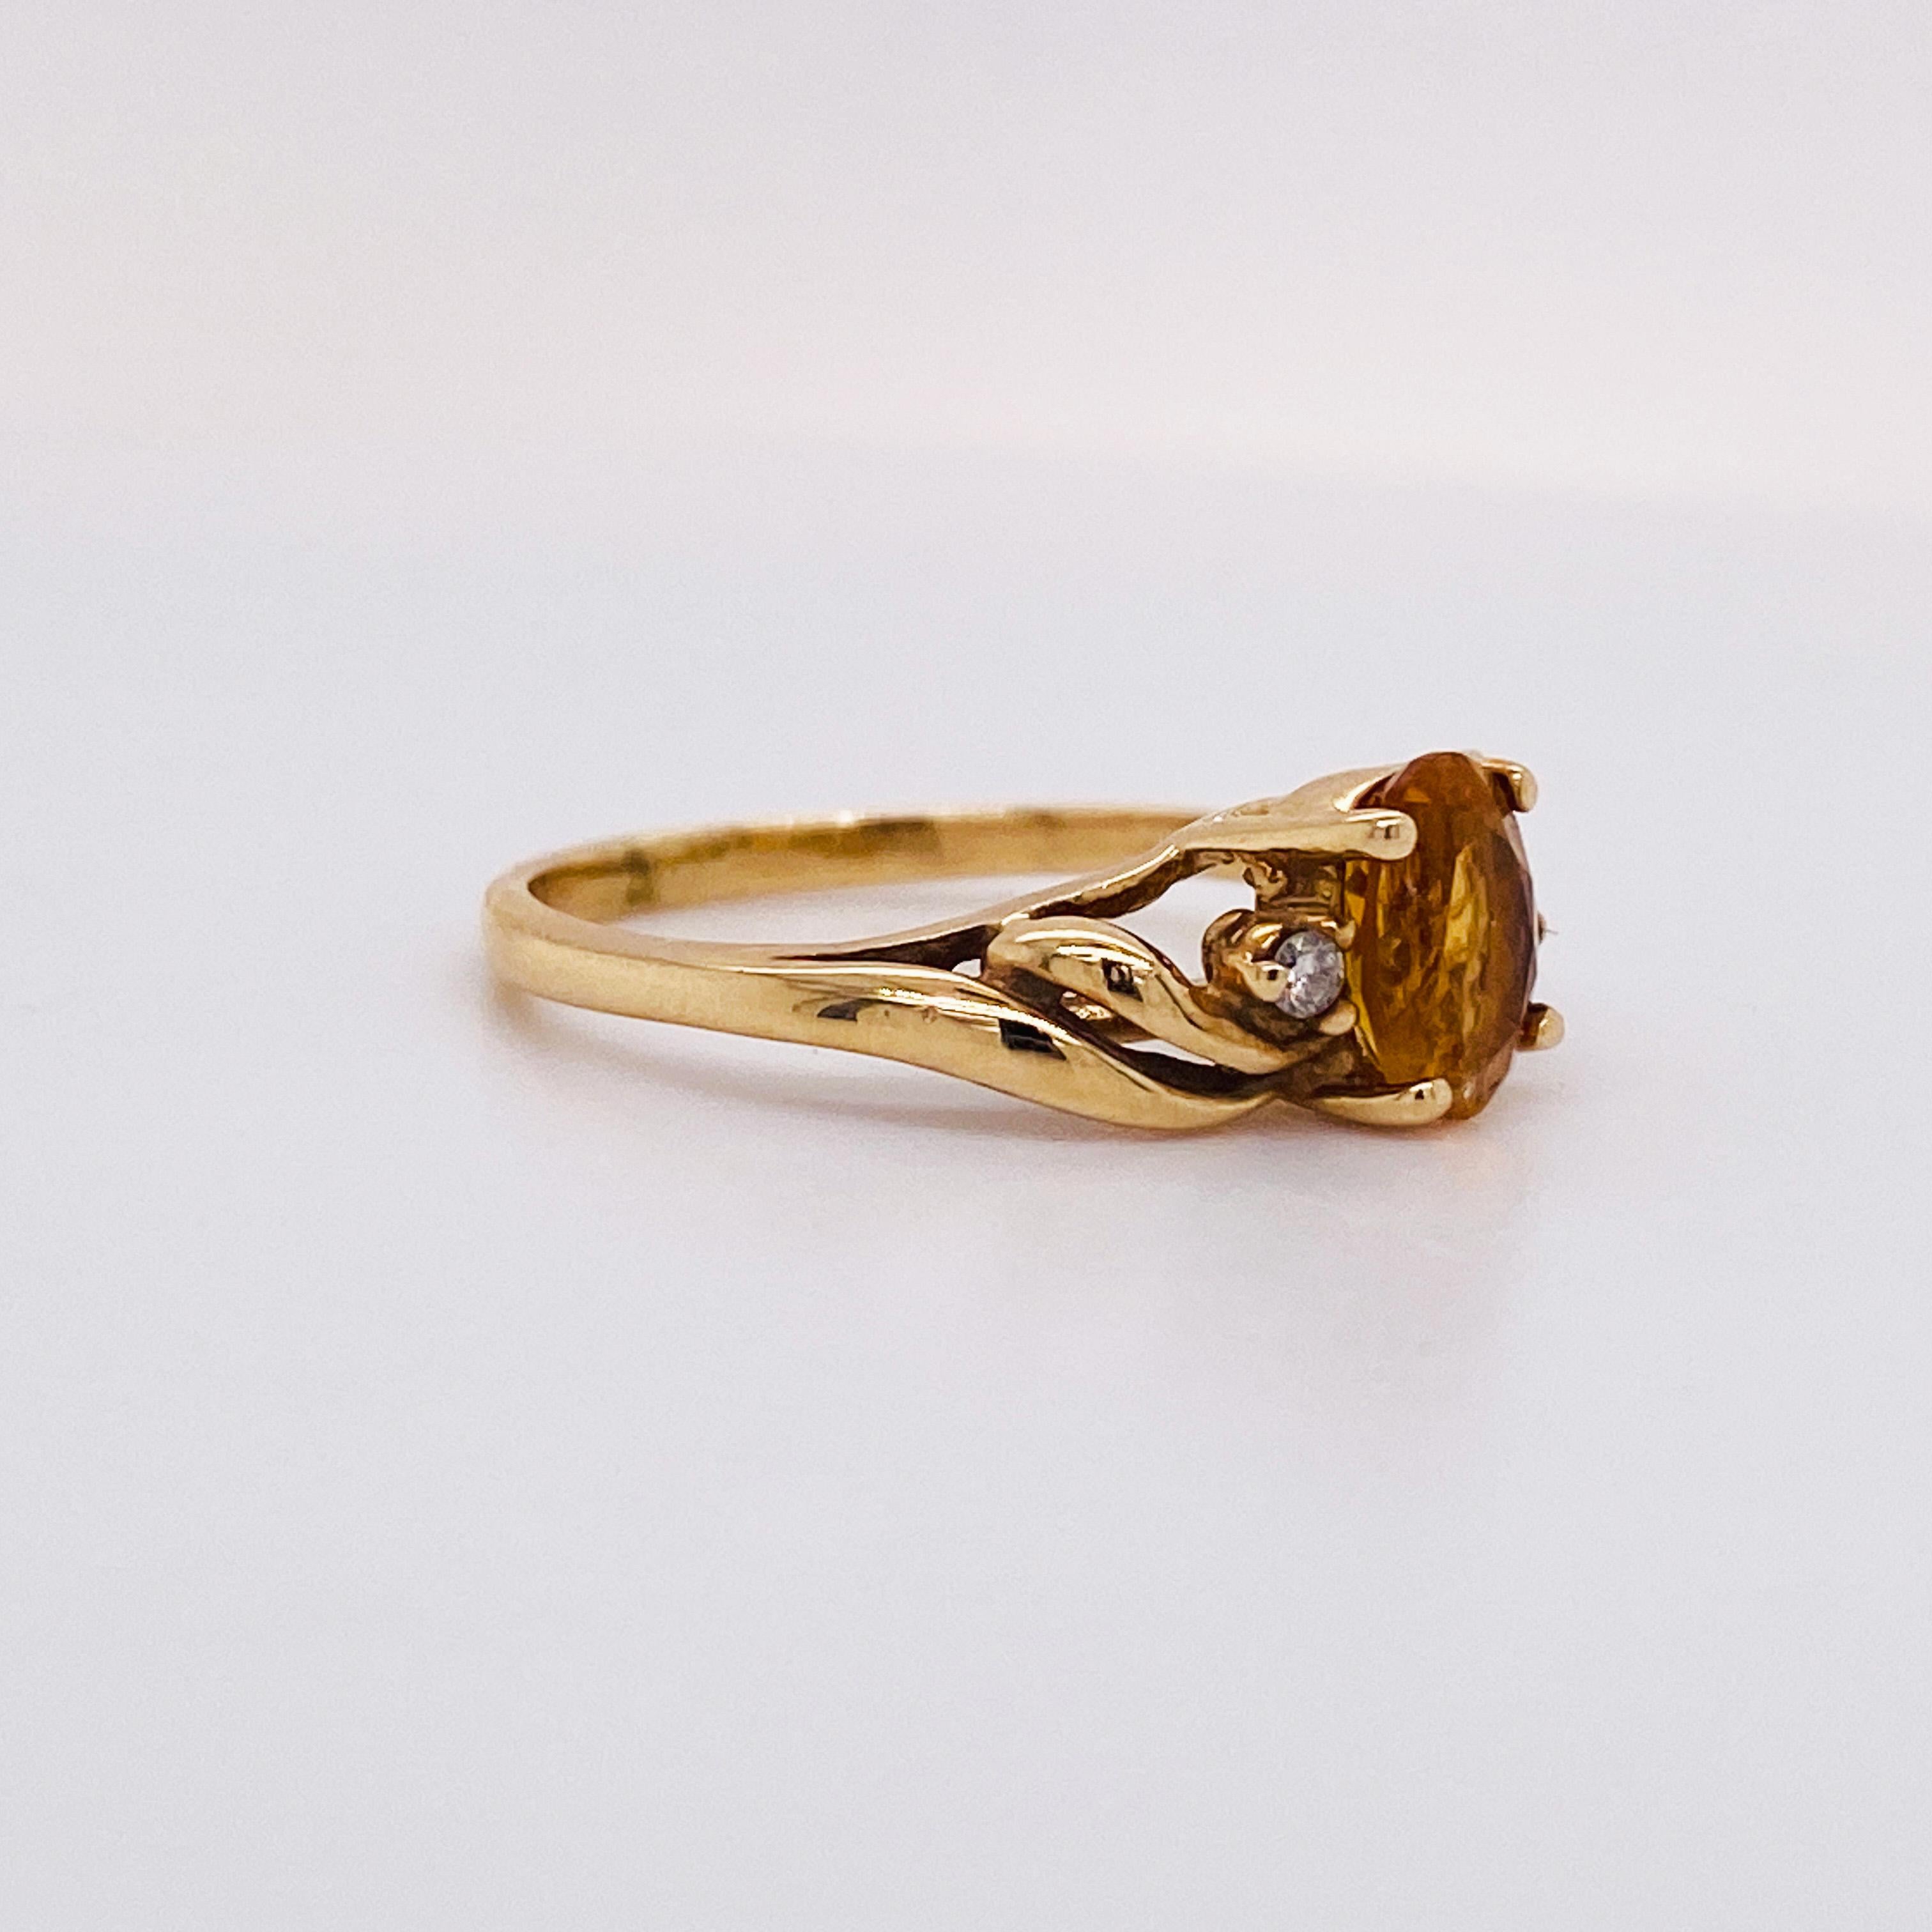 Celebrate your November loved one with this sweeping and swirling citrine and diamond ring. This could make a perfect graduation gift or push present! The oval citrine is the color of a glorious warm orange sunset! This beauty is marked down from